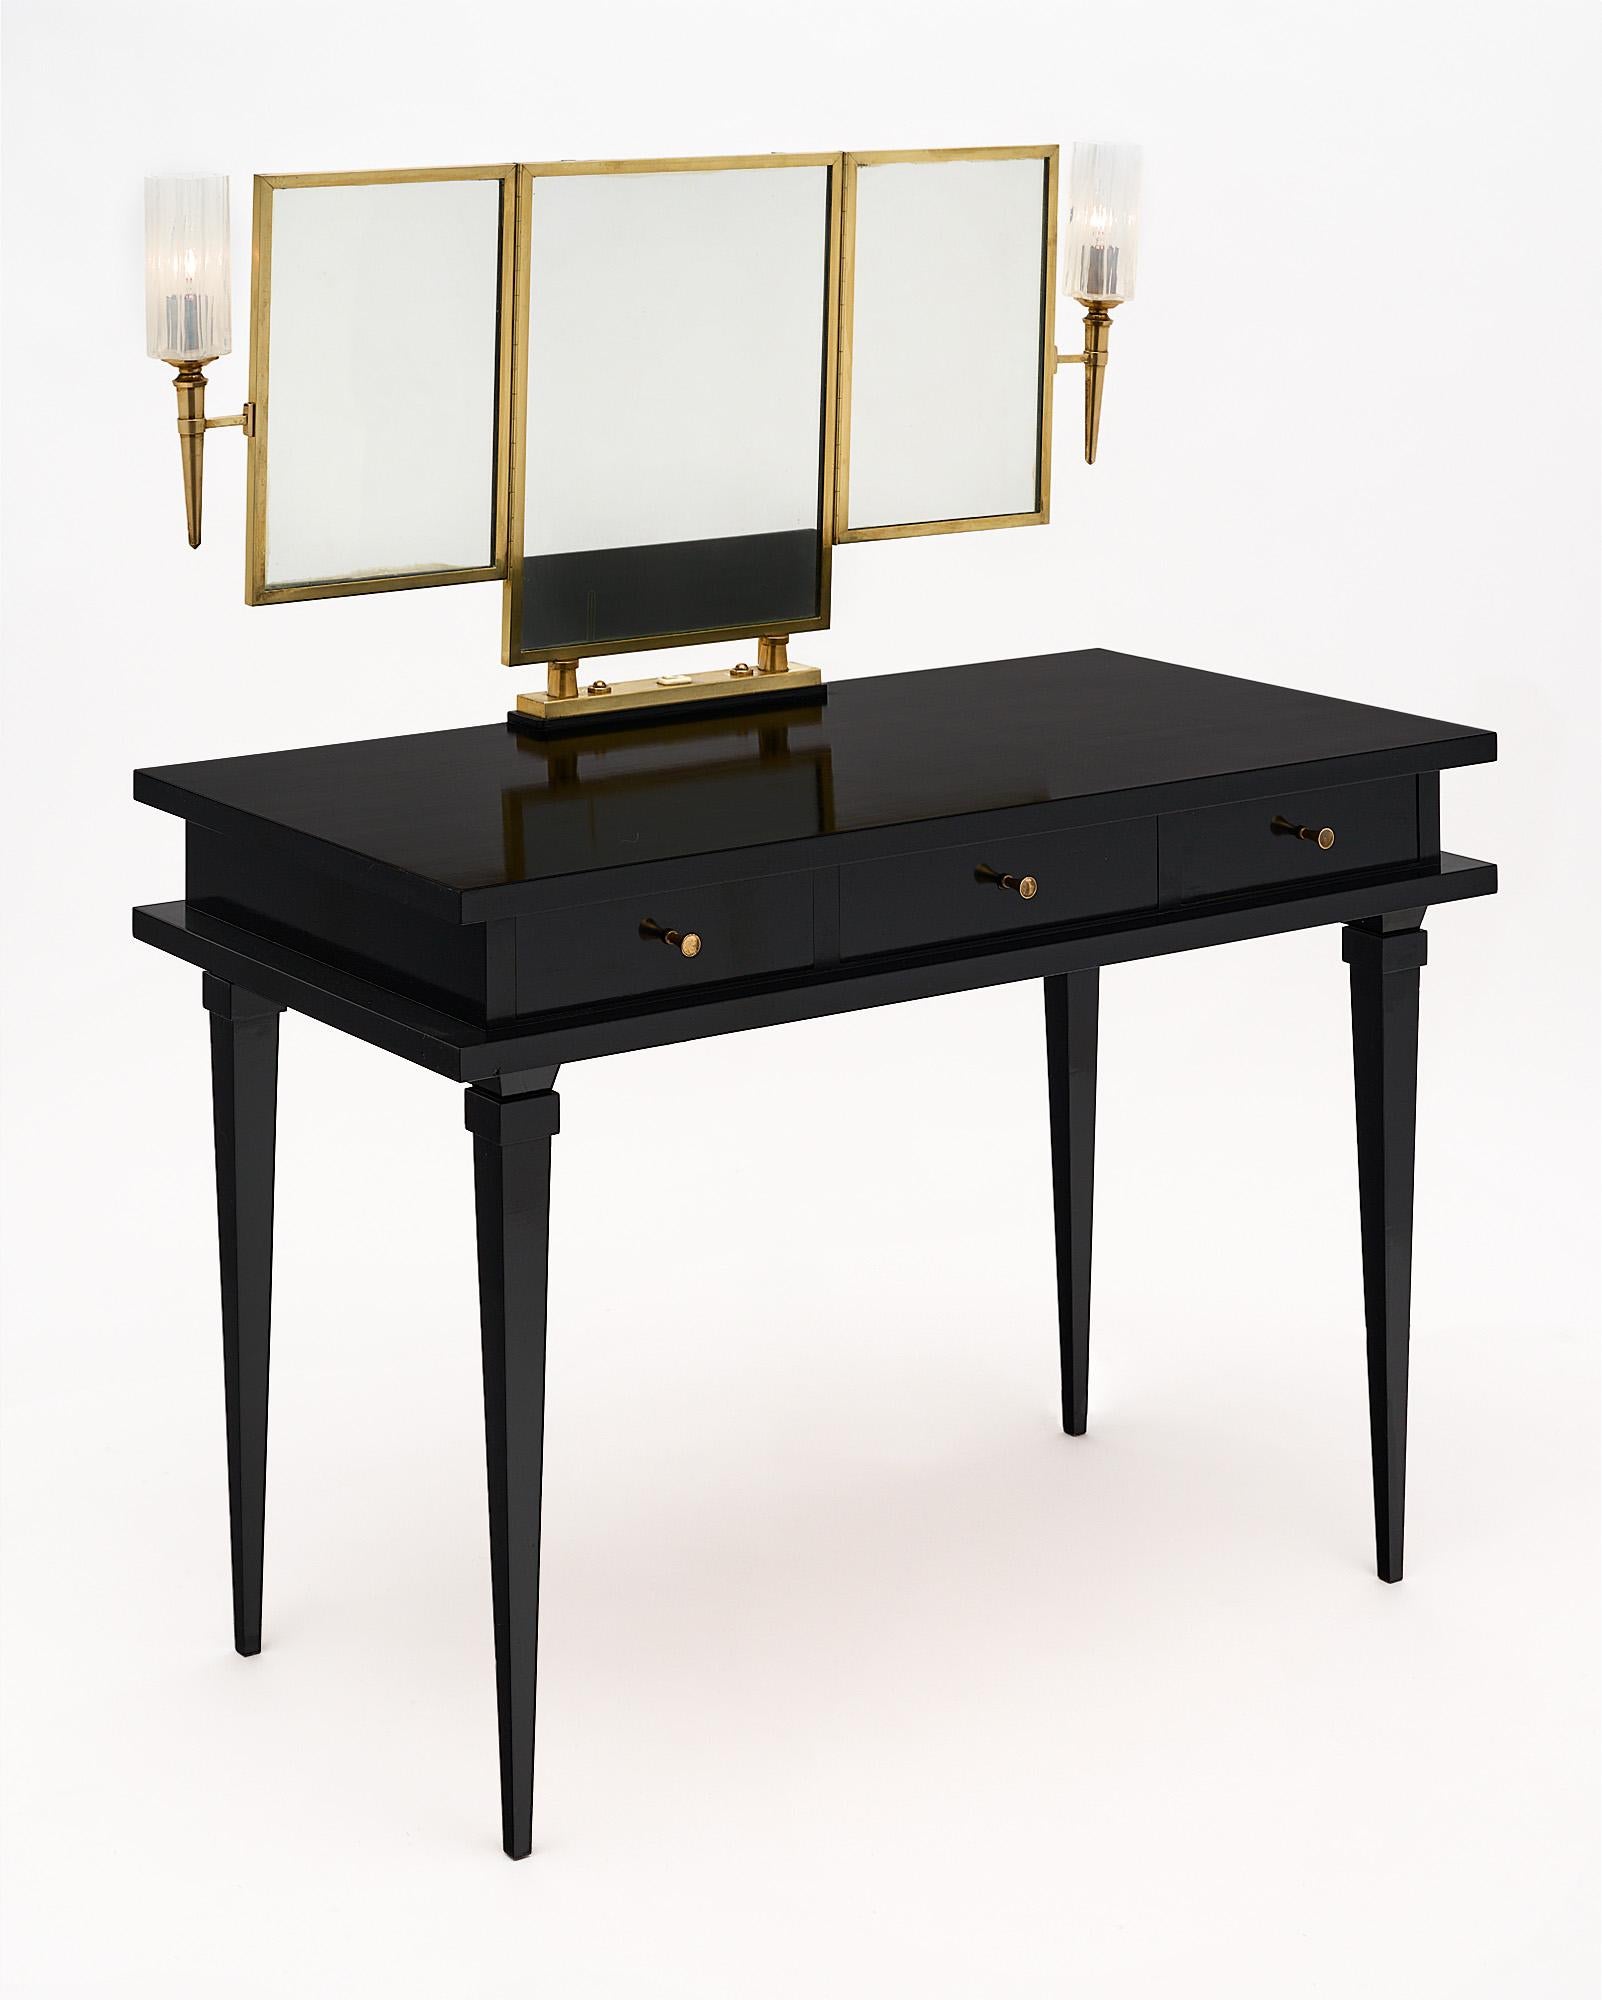 Vanity, French, made of ebonized sycamore. The vanity is in the manner of Jacques Adnet and features three dovetailed drawers and tapered legs. This elegant piece is finished in a lustrous French polish and enhanced with a triptych brass framed